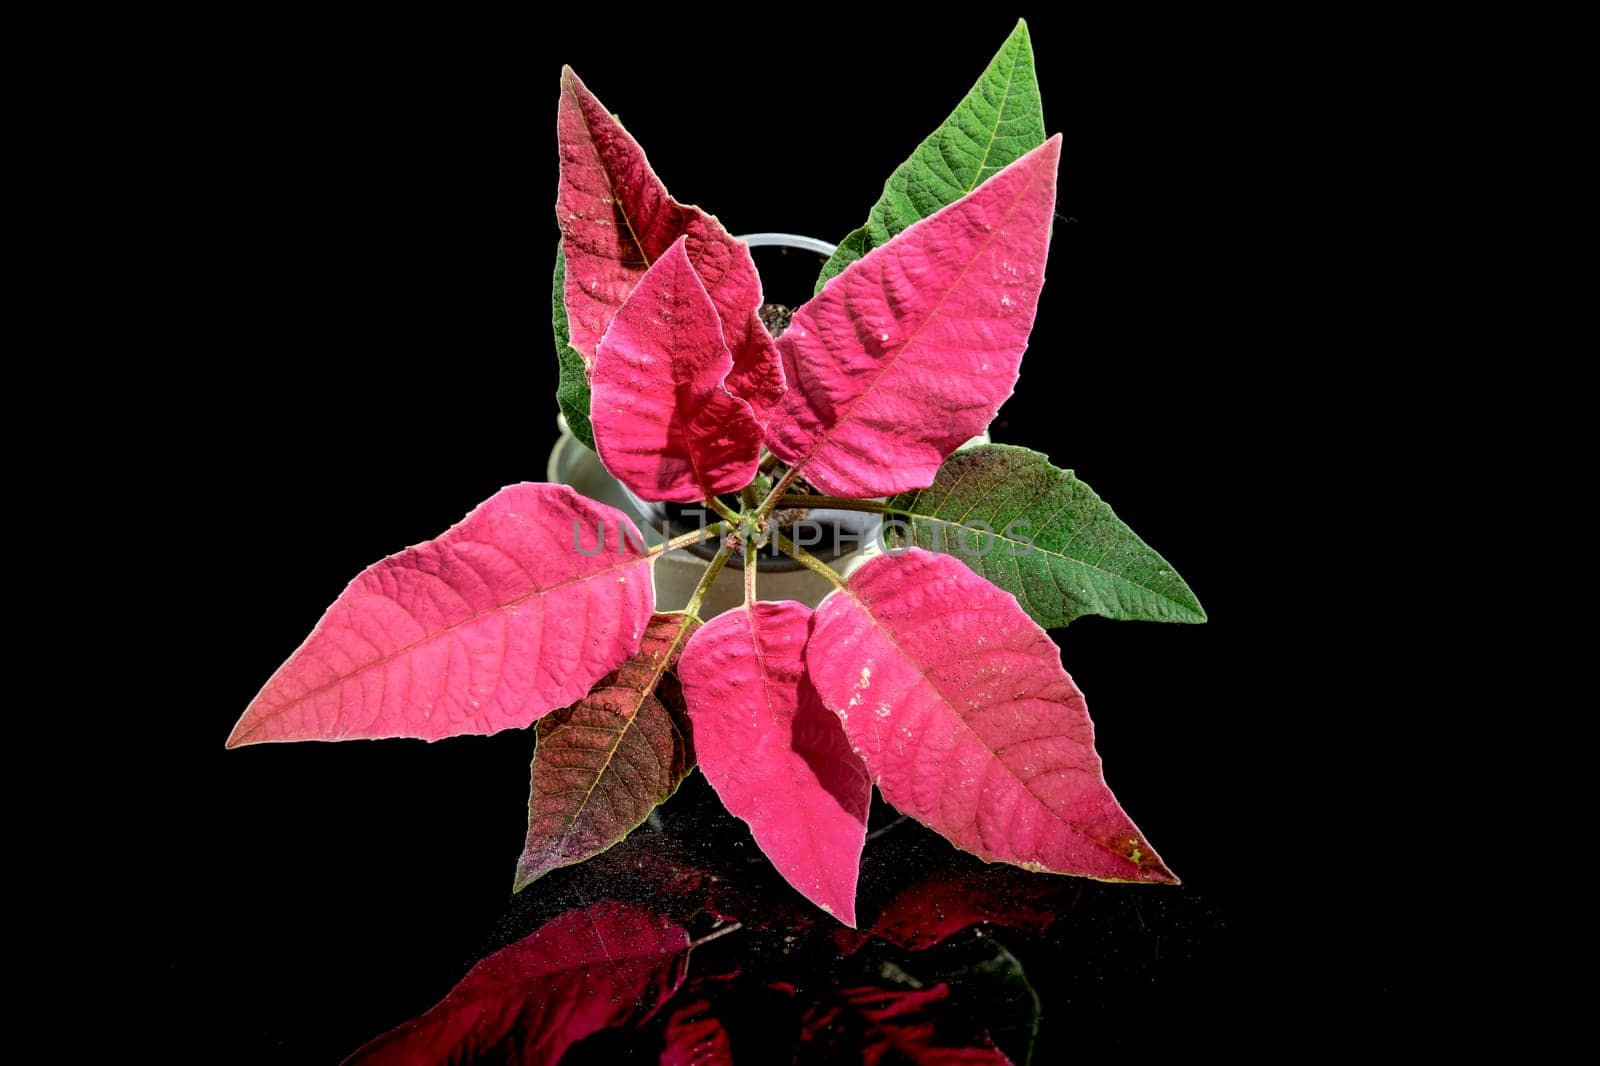 Red leaves of Poinsettia on a black background by Multipedia